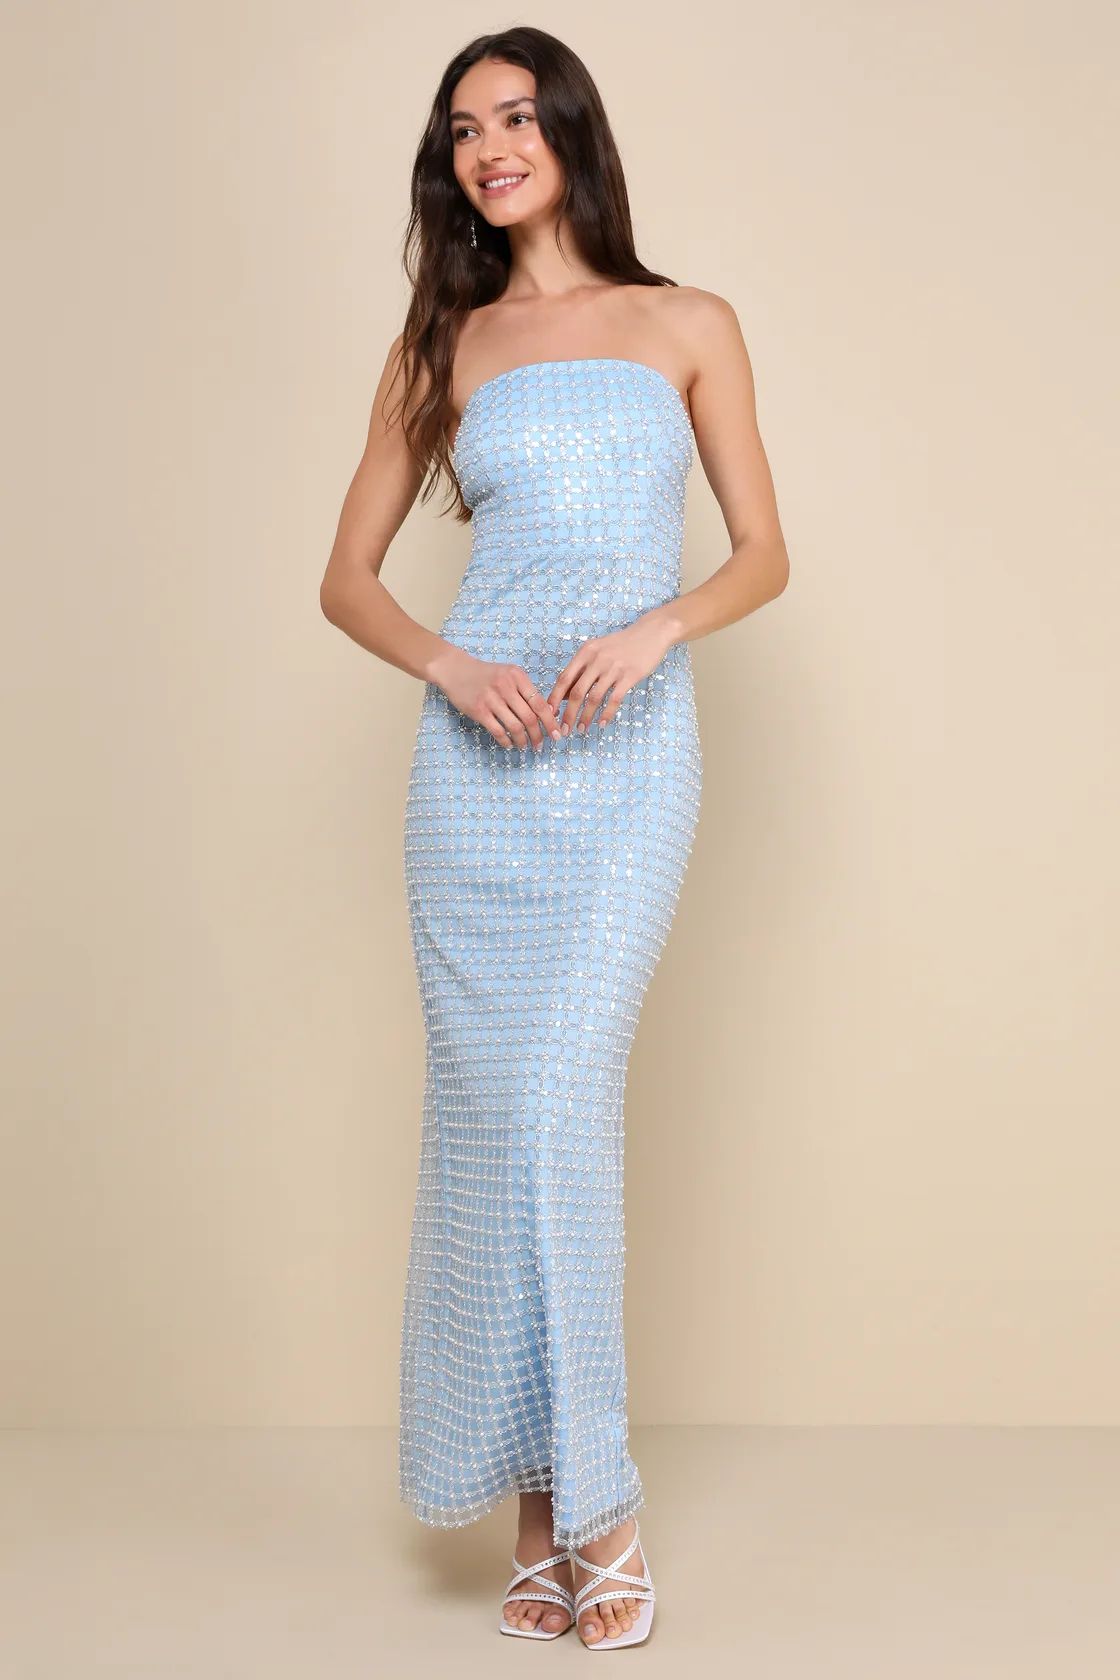 Perfectly Luxurious Light Blue Pearl Strapless Maxi Dress | Lulus